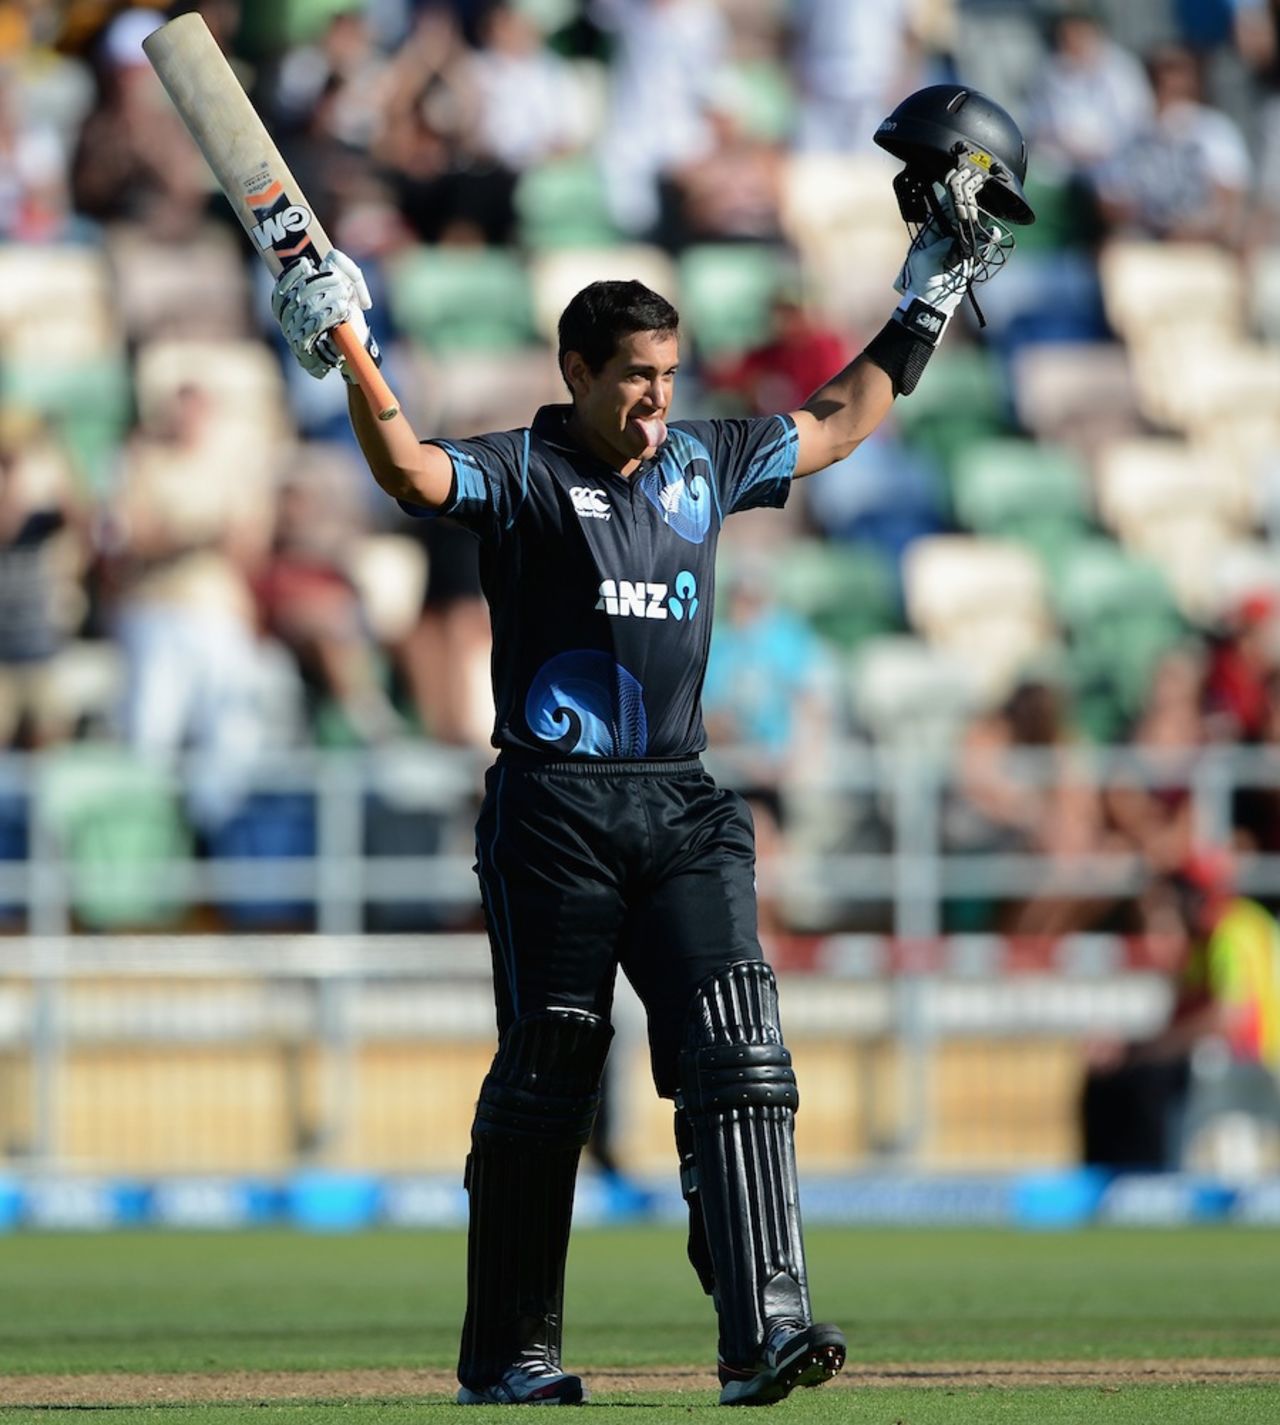 Ross Taylor raises his bat after completing his seventh ODI hundred New Zealand v England, 2nd ODI, Napier, February 20, 2013